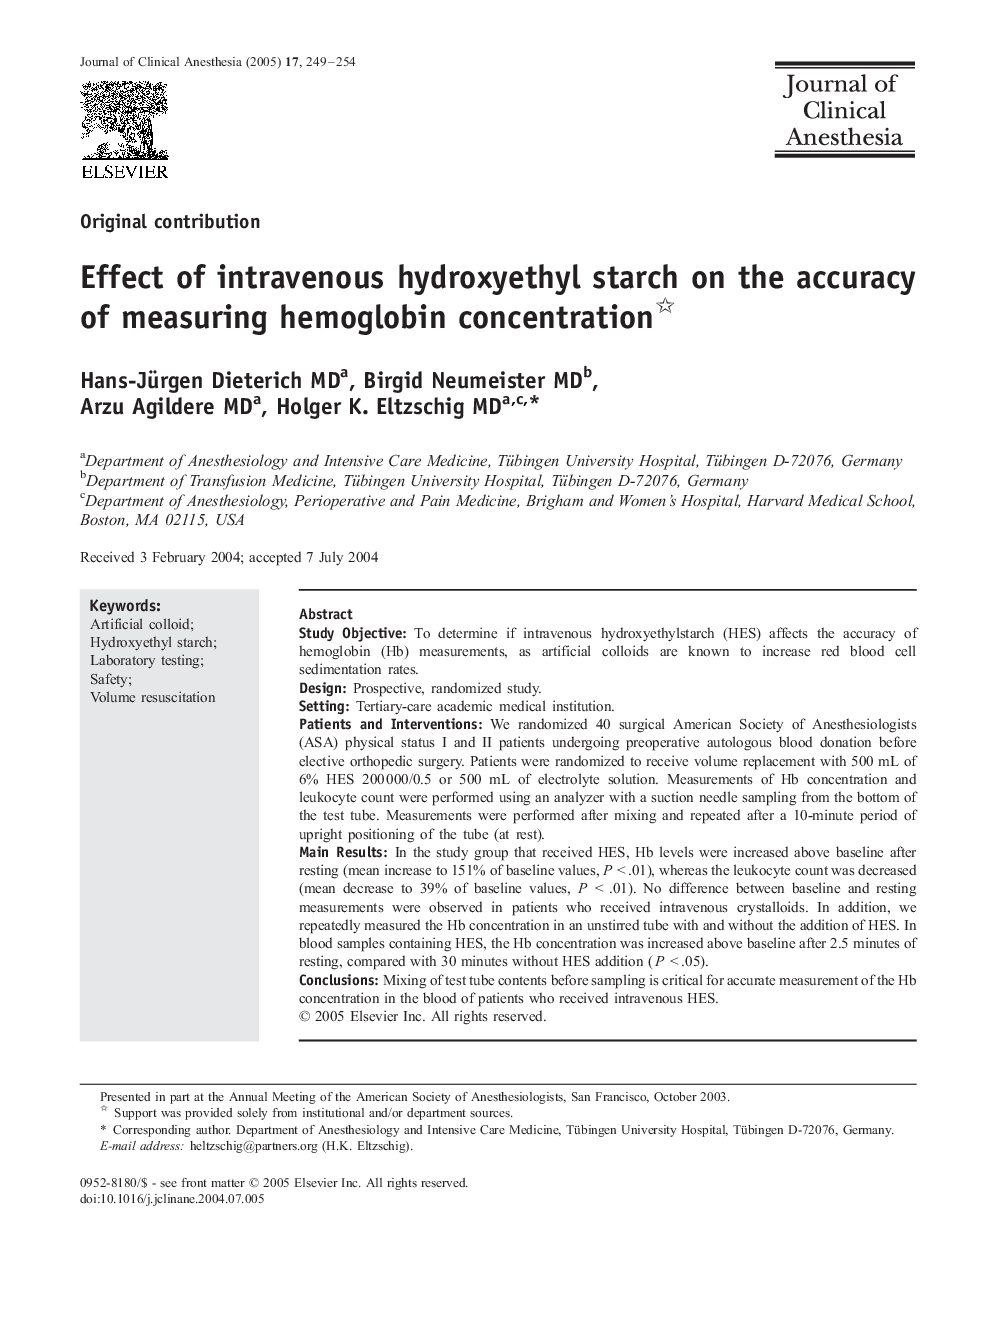 Effect of intravenous hydroxyethyl starch on the accuracy of measuring hemoglobin concentration